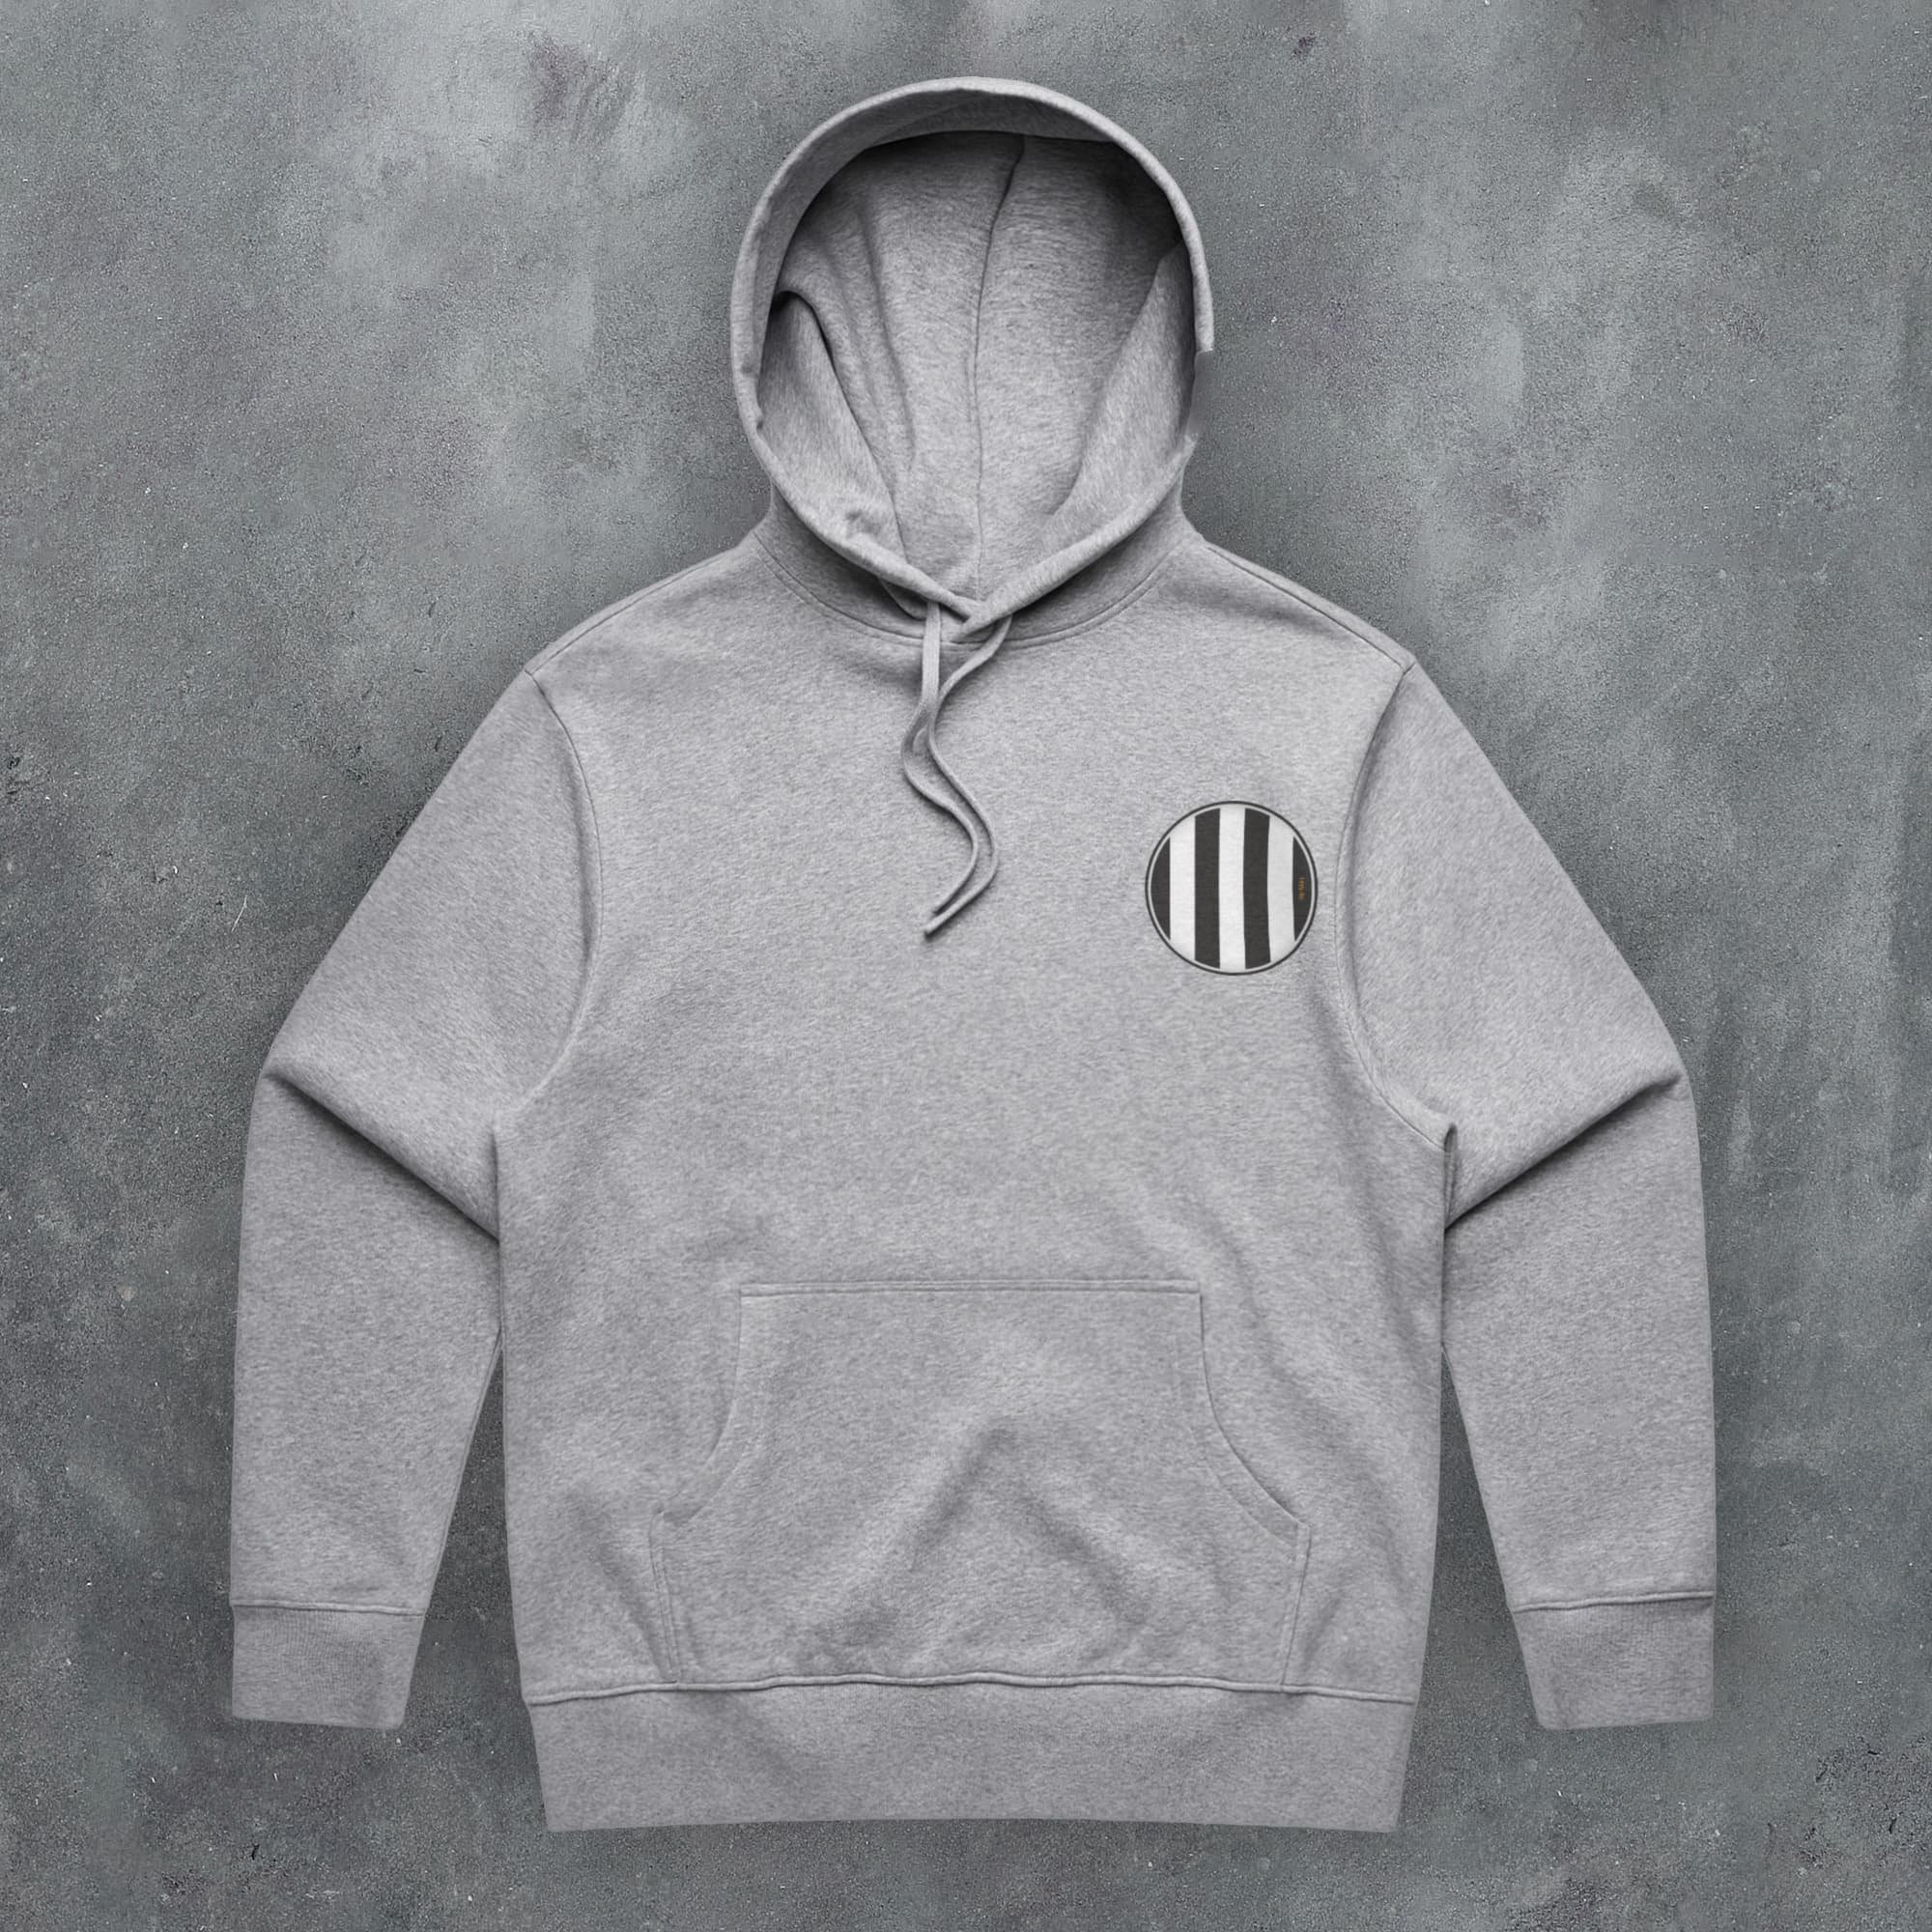 a grey hoodie with a black and white stripe on it